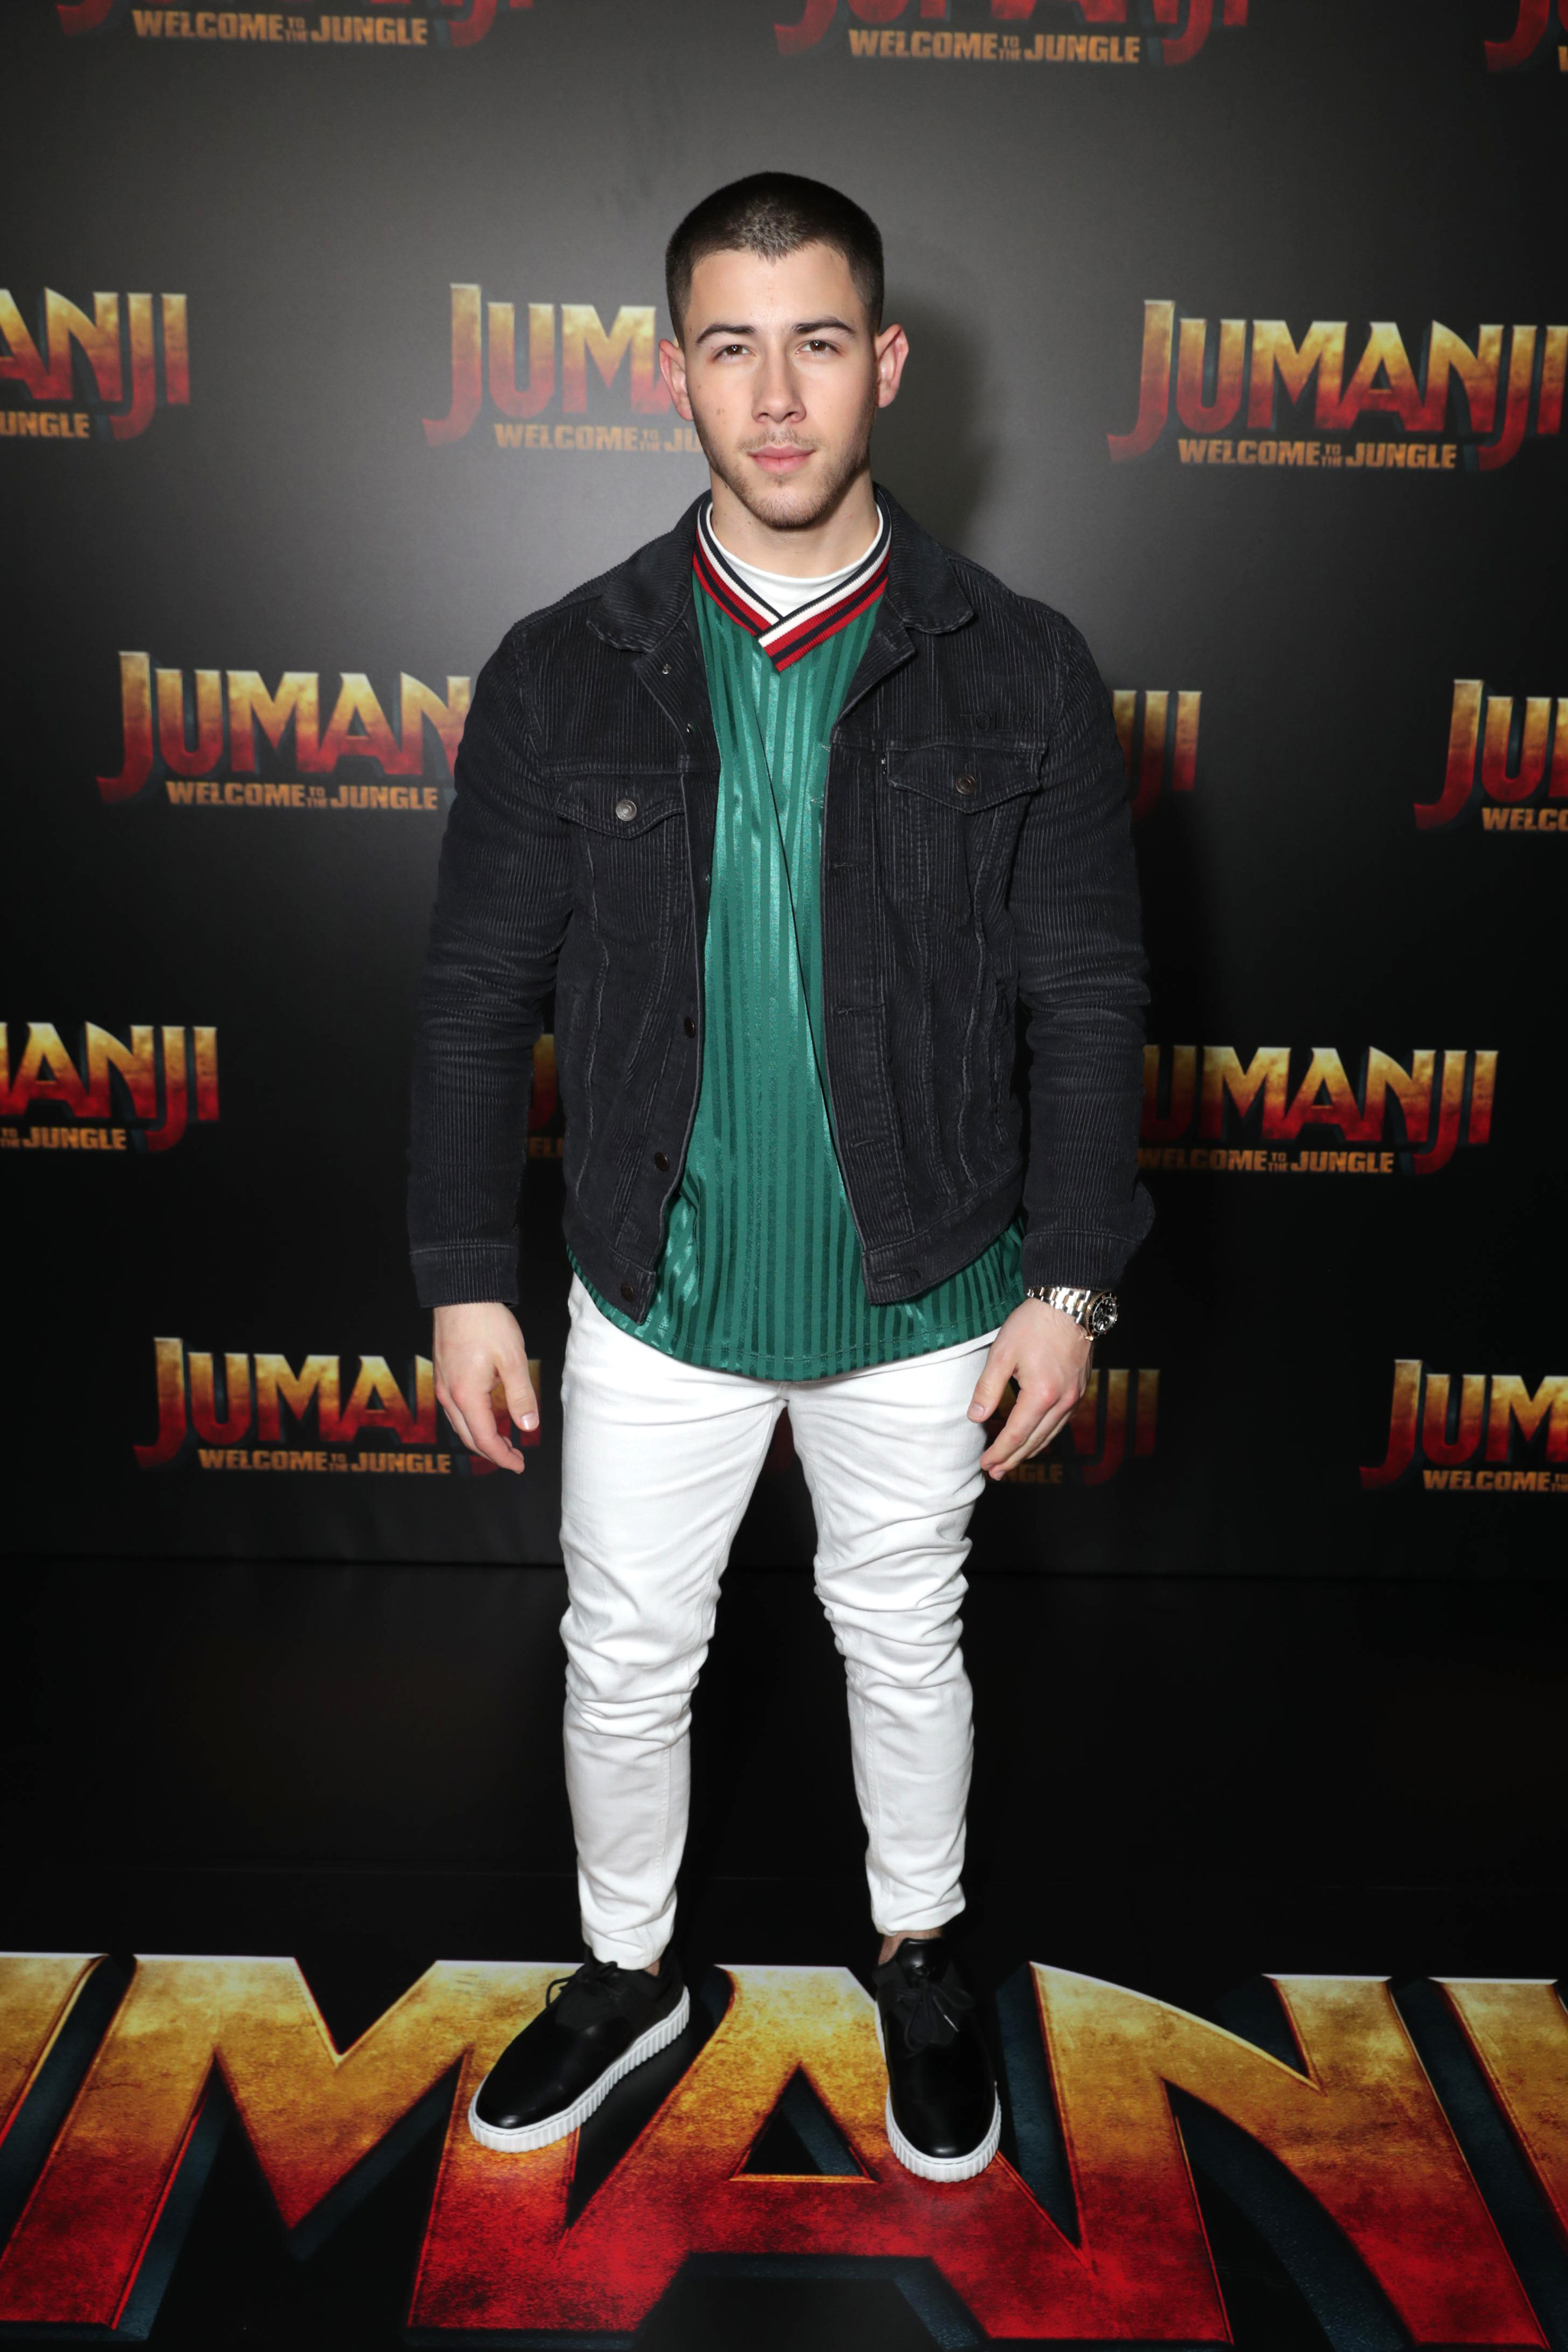 Nick Jonas seen at Columbia Pictures 'Jumanji: Welcome to the Jungle' photo call at 2017 CinemaCon on Monday, March 27, 2017, in Las Vegas.